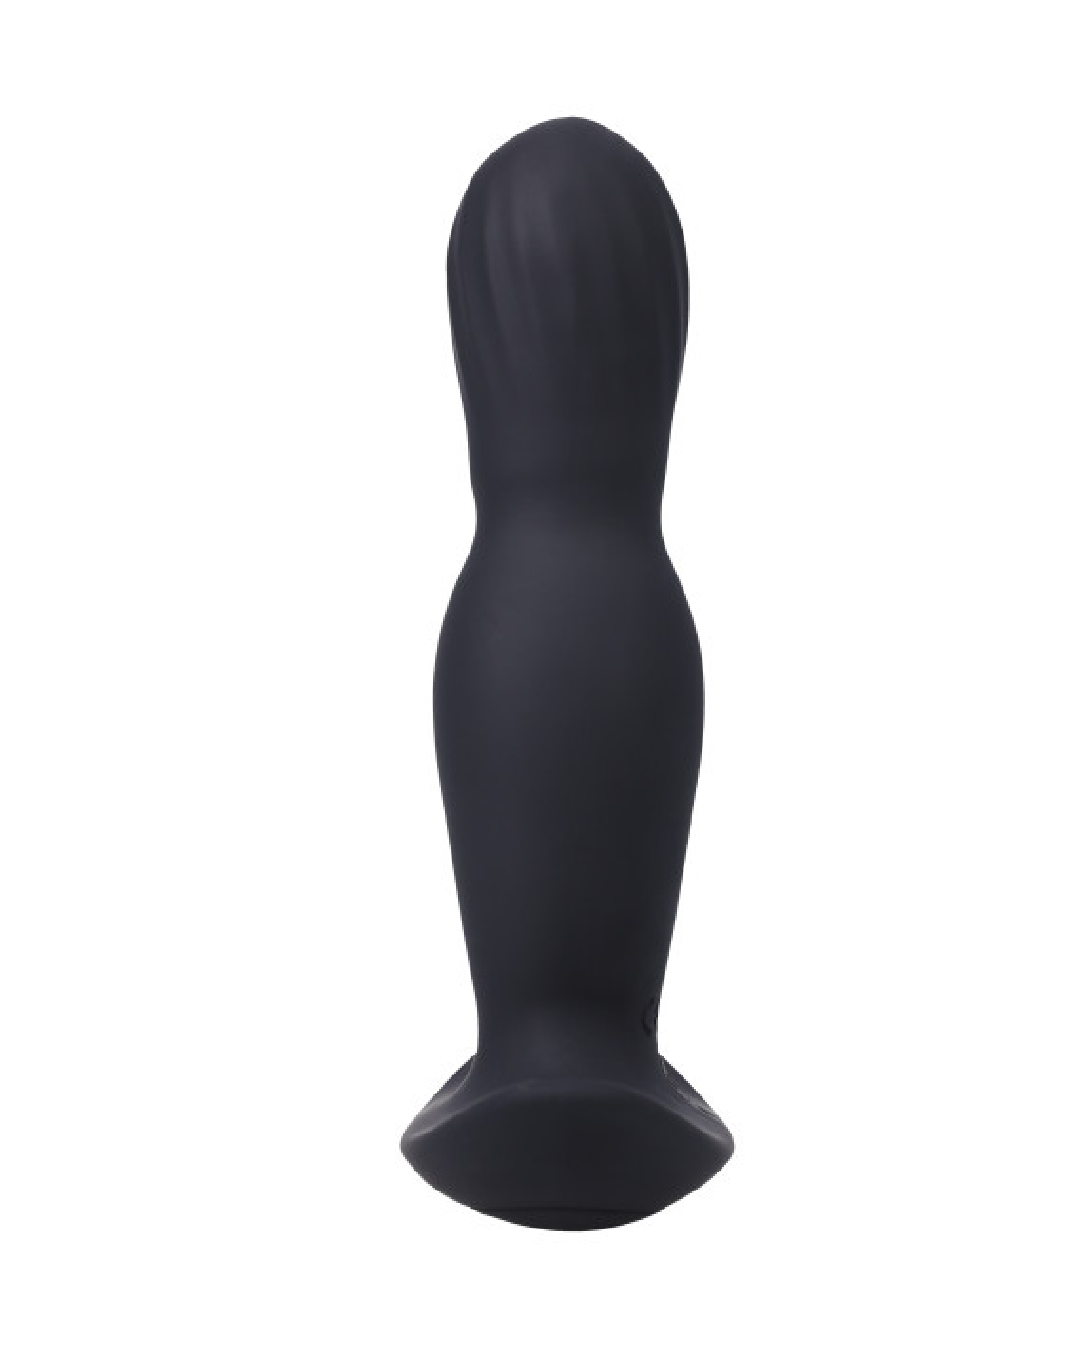 A-Play Expander Vibrating Expanding Anal Plug with Remote - Black